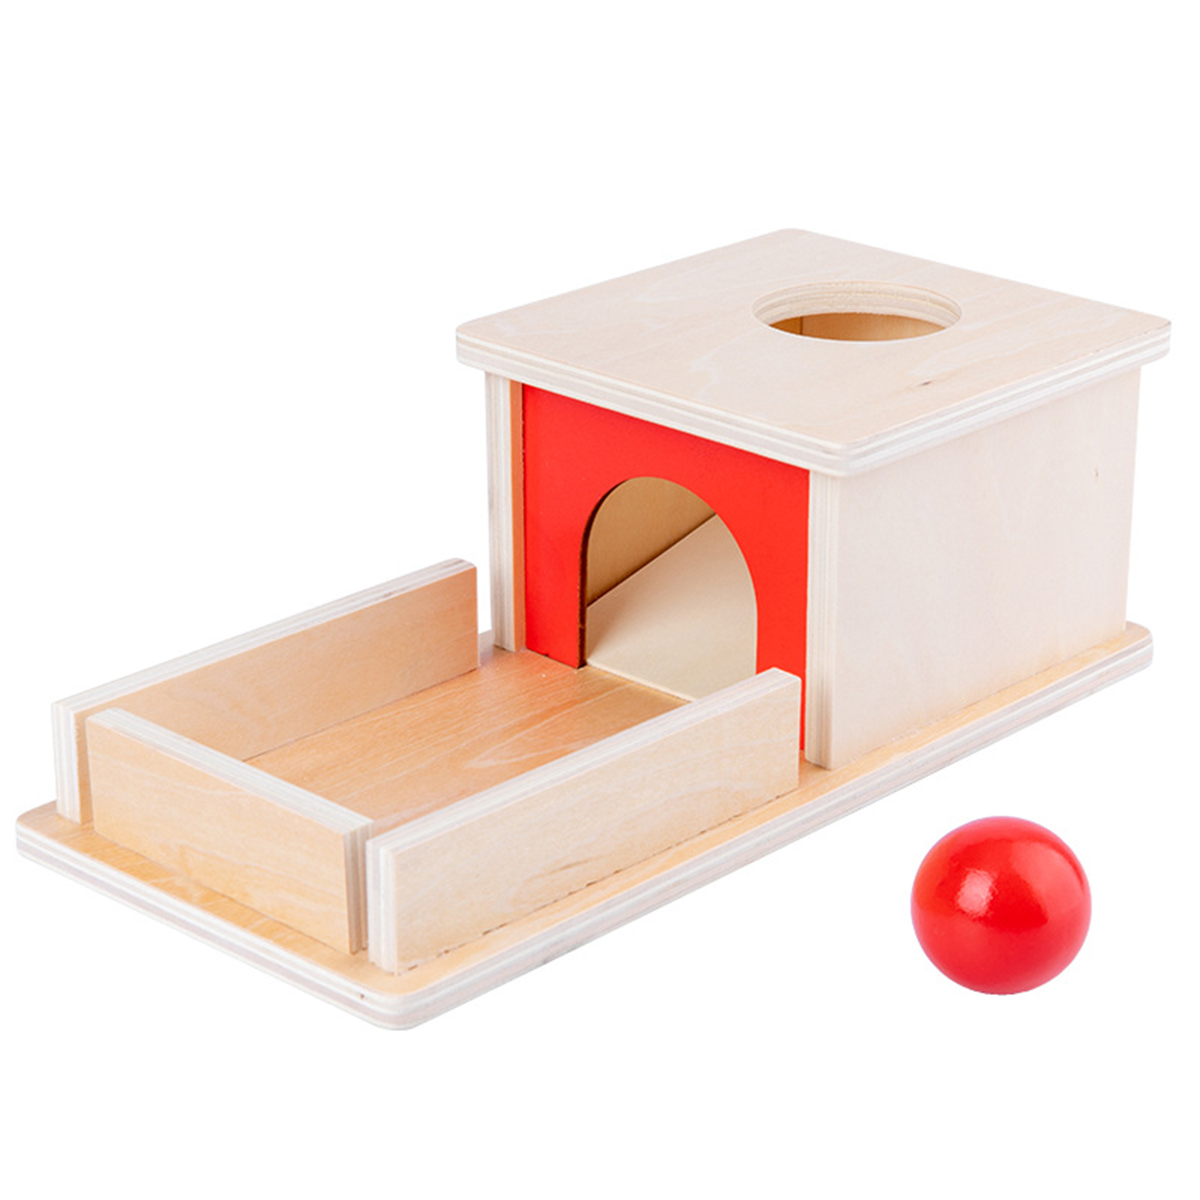 Montessori-Object-Permanence-Box-Wooden-Permanent-Box-Practical-Learning-Educational-Toy-for-Kids-Gi-1773227-4